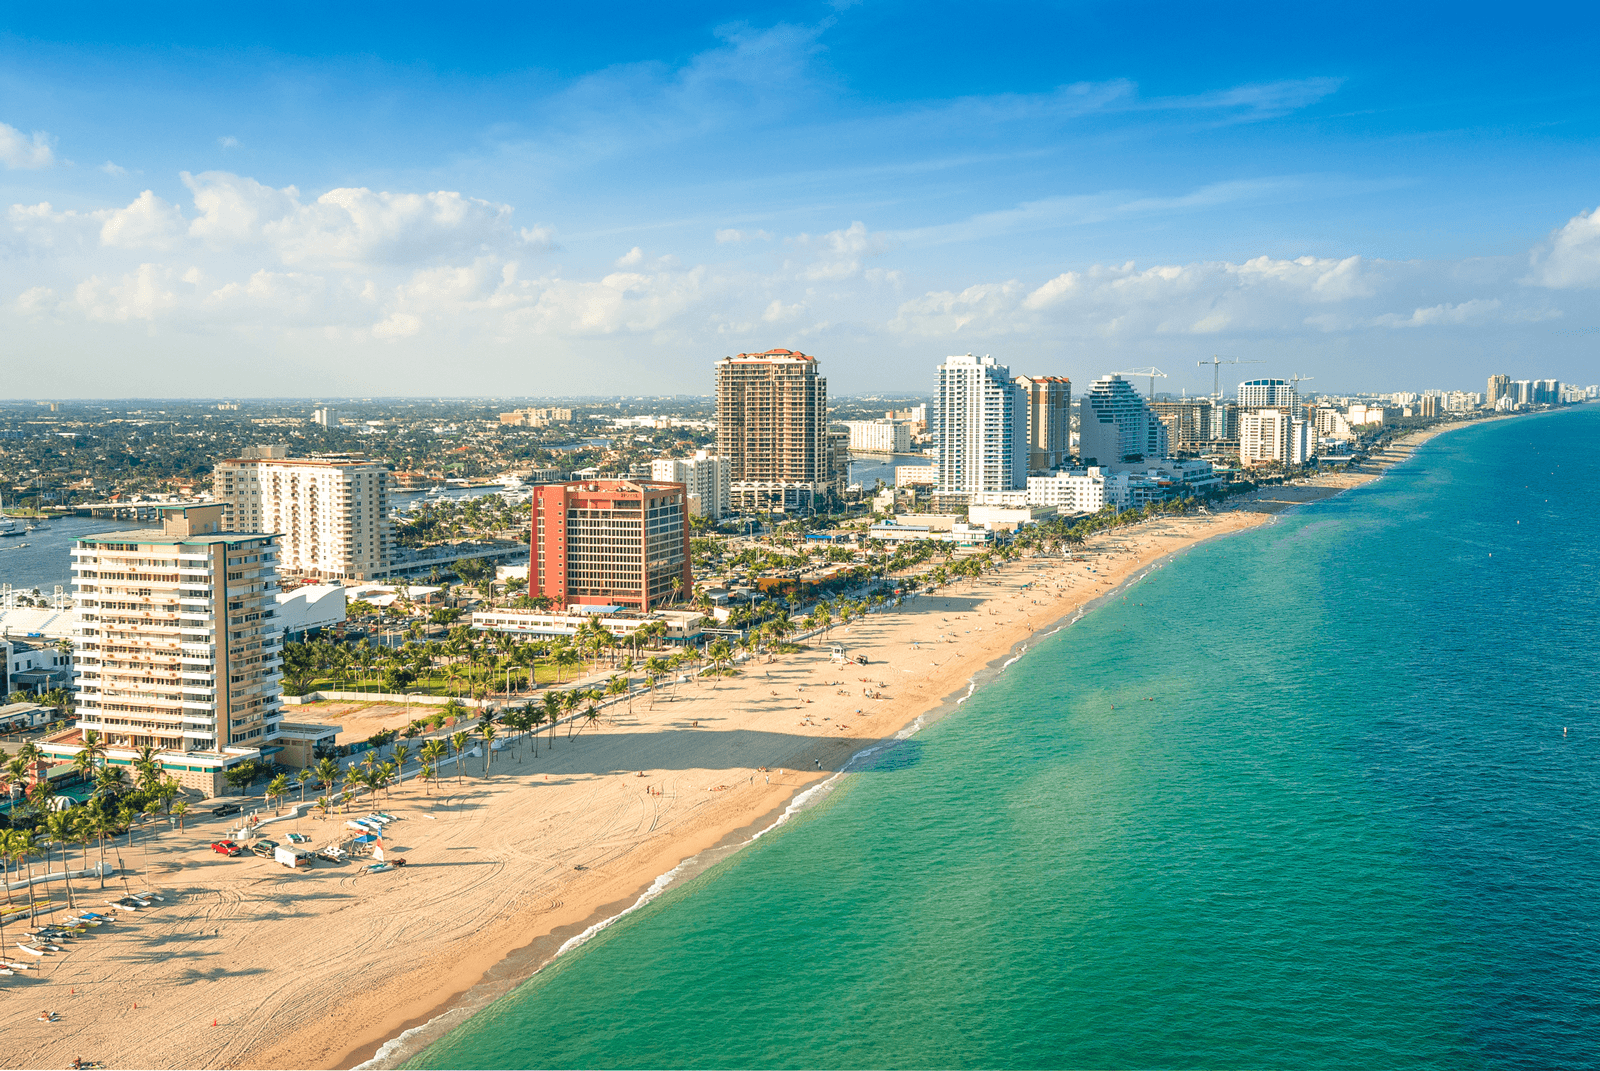 Aerial shot of Fort Lauderdale beach with tall buildings along the sand